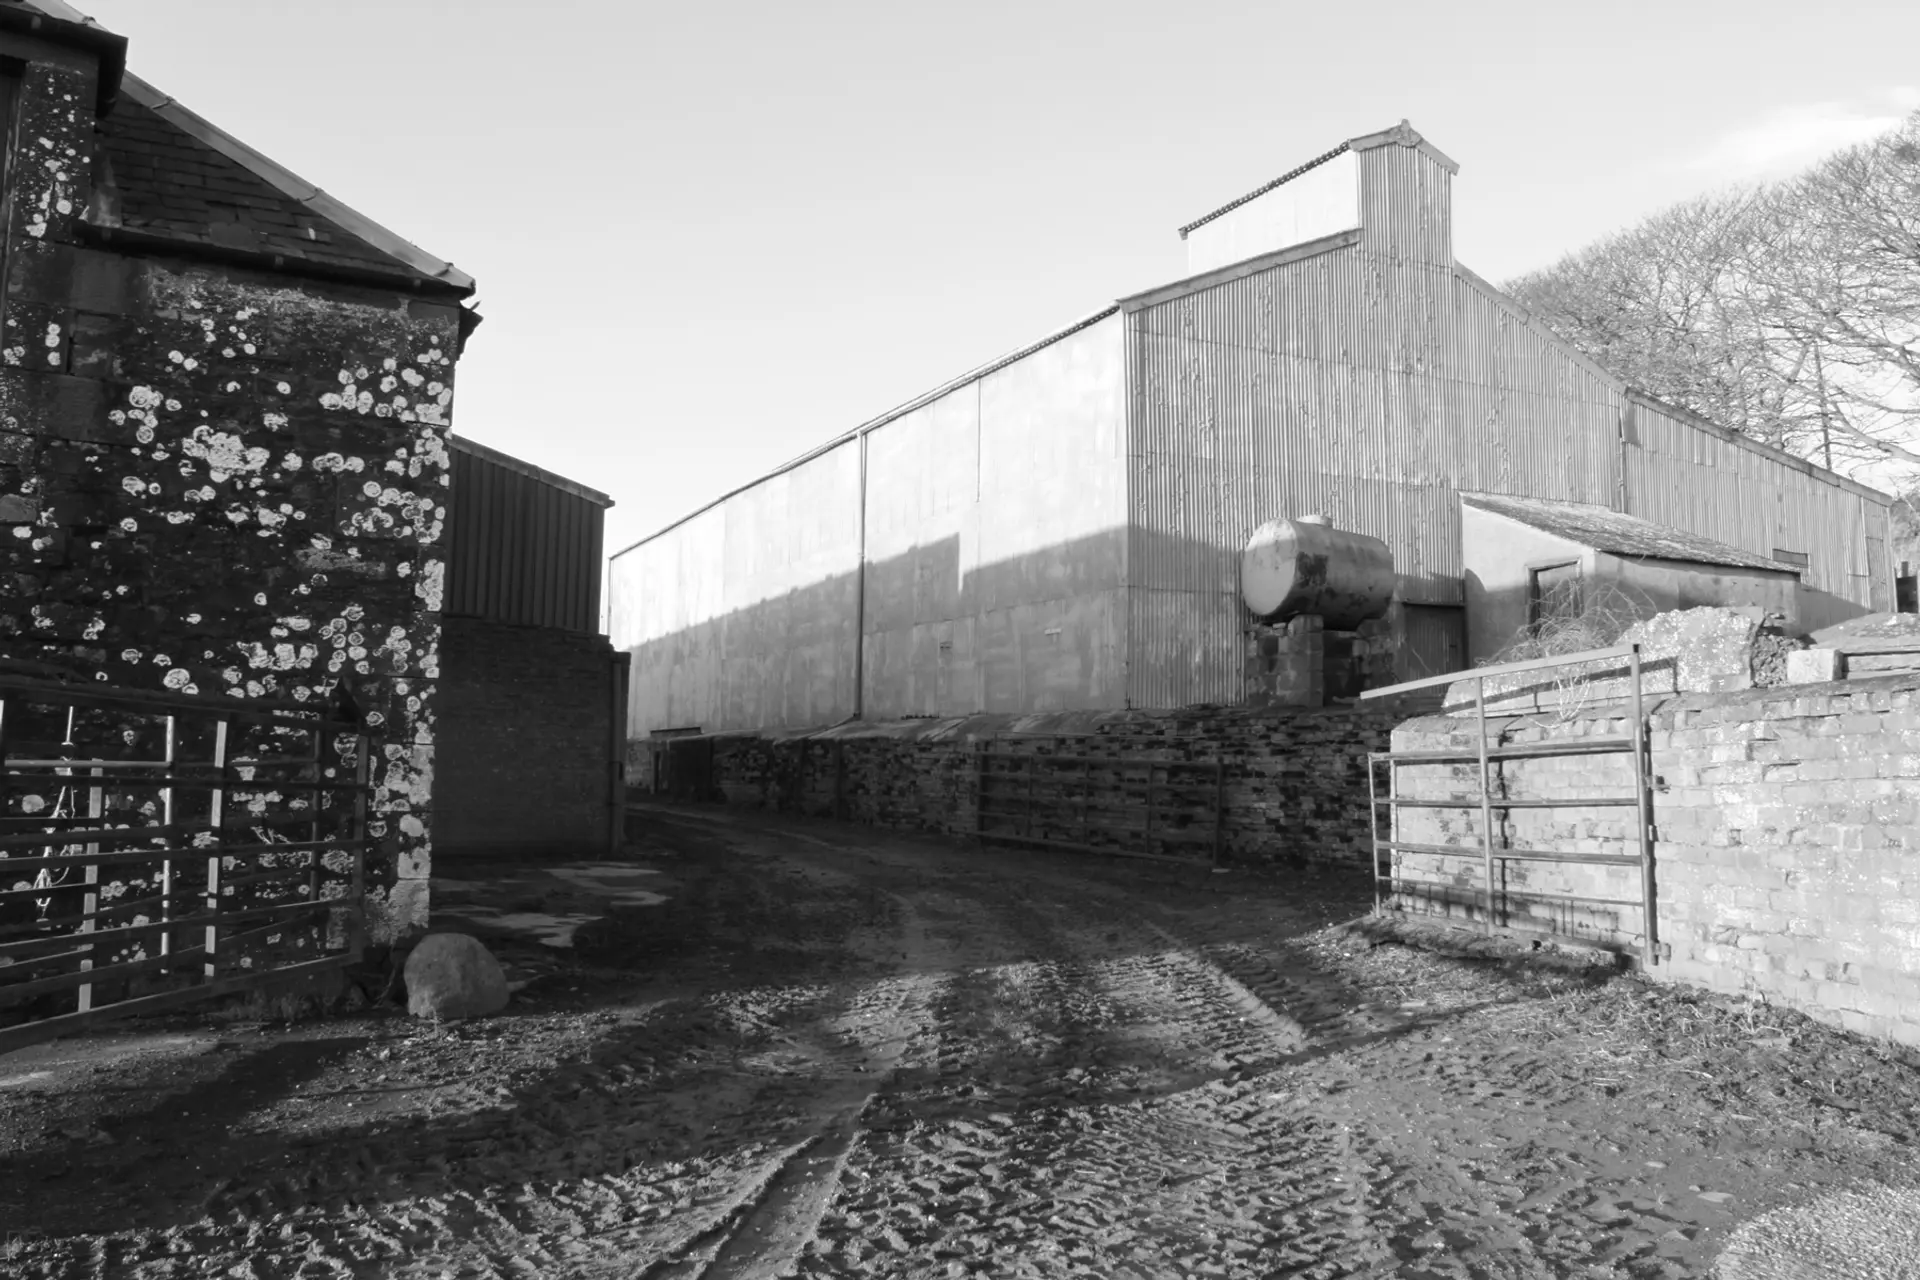 A grayscale image of a farm yard, the ground is wet and muddy and the path leads us through an open metal gate to a corrugated barn.